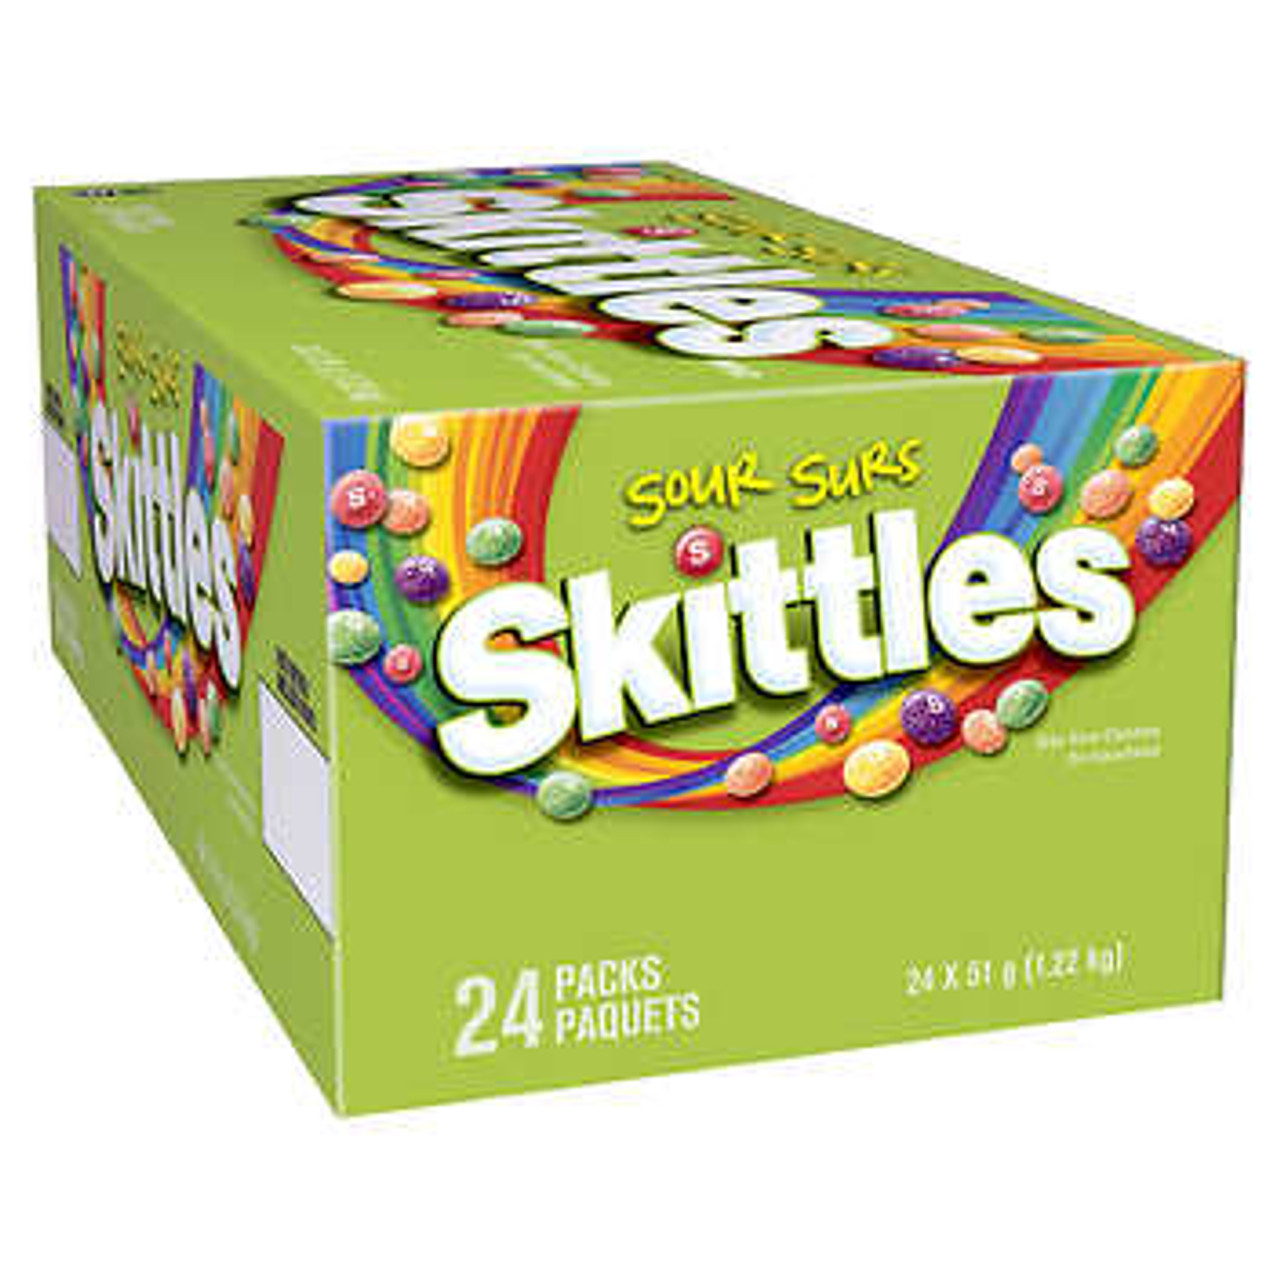 Skittles Sour Candy 24-Count - Tangy and Colorful Fruit-flavored Candies
- Chicken Pieces